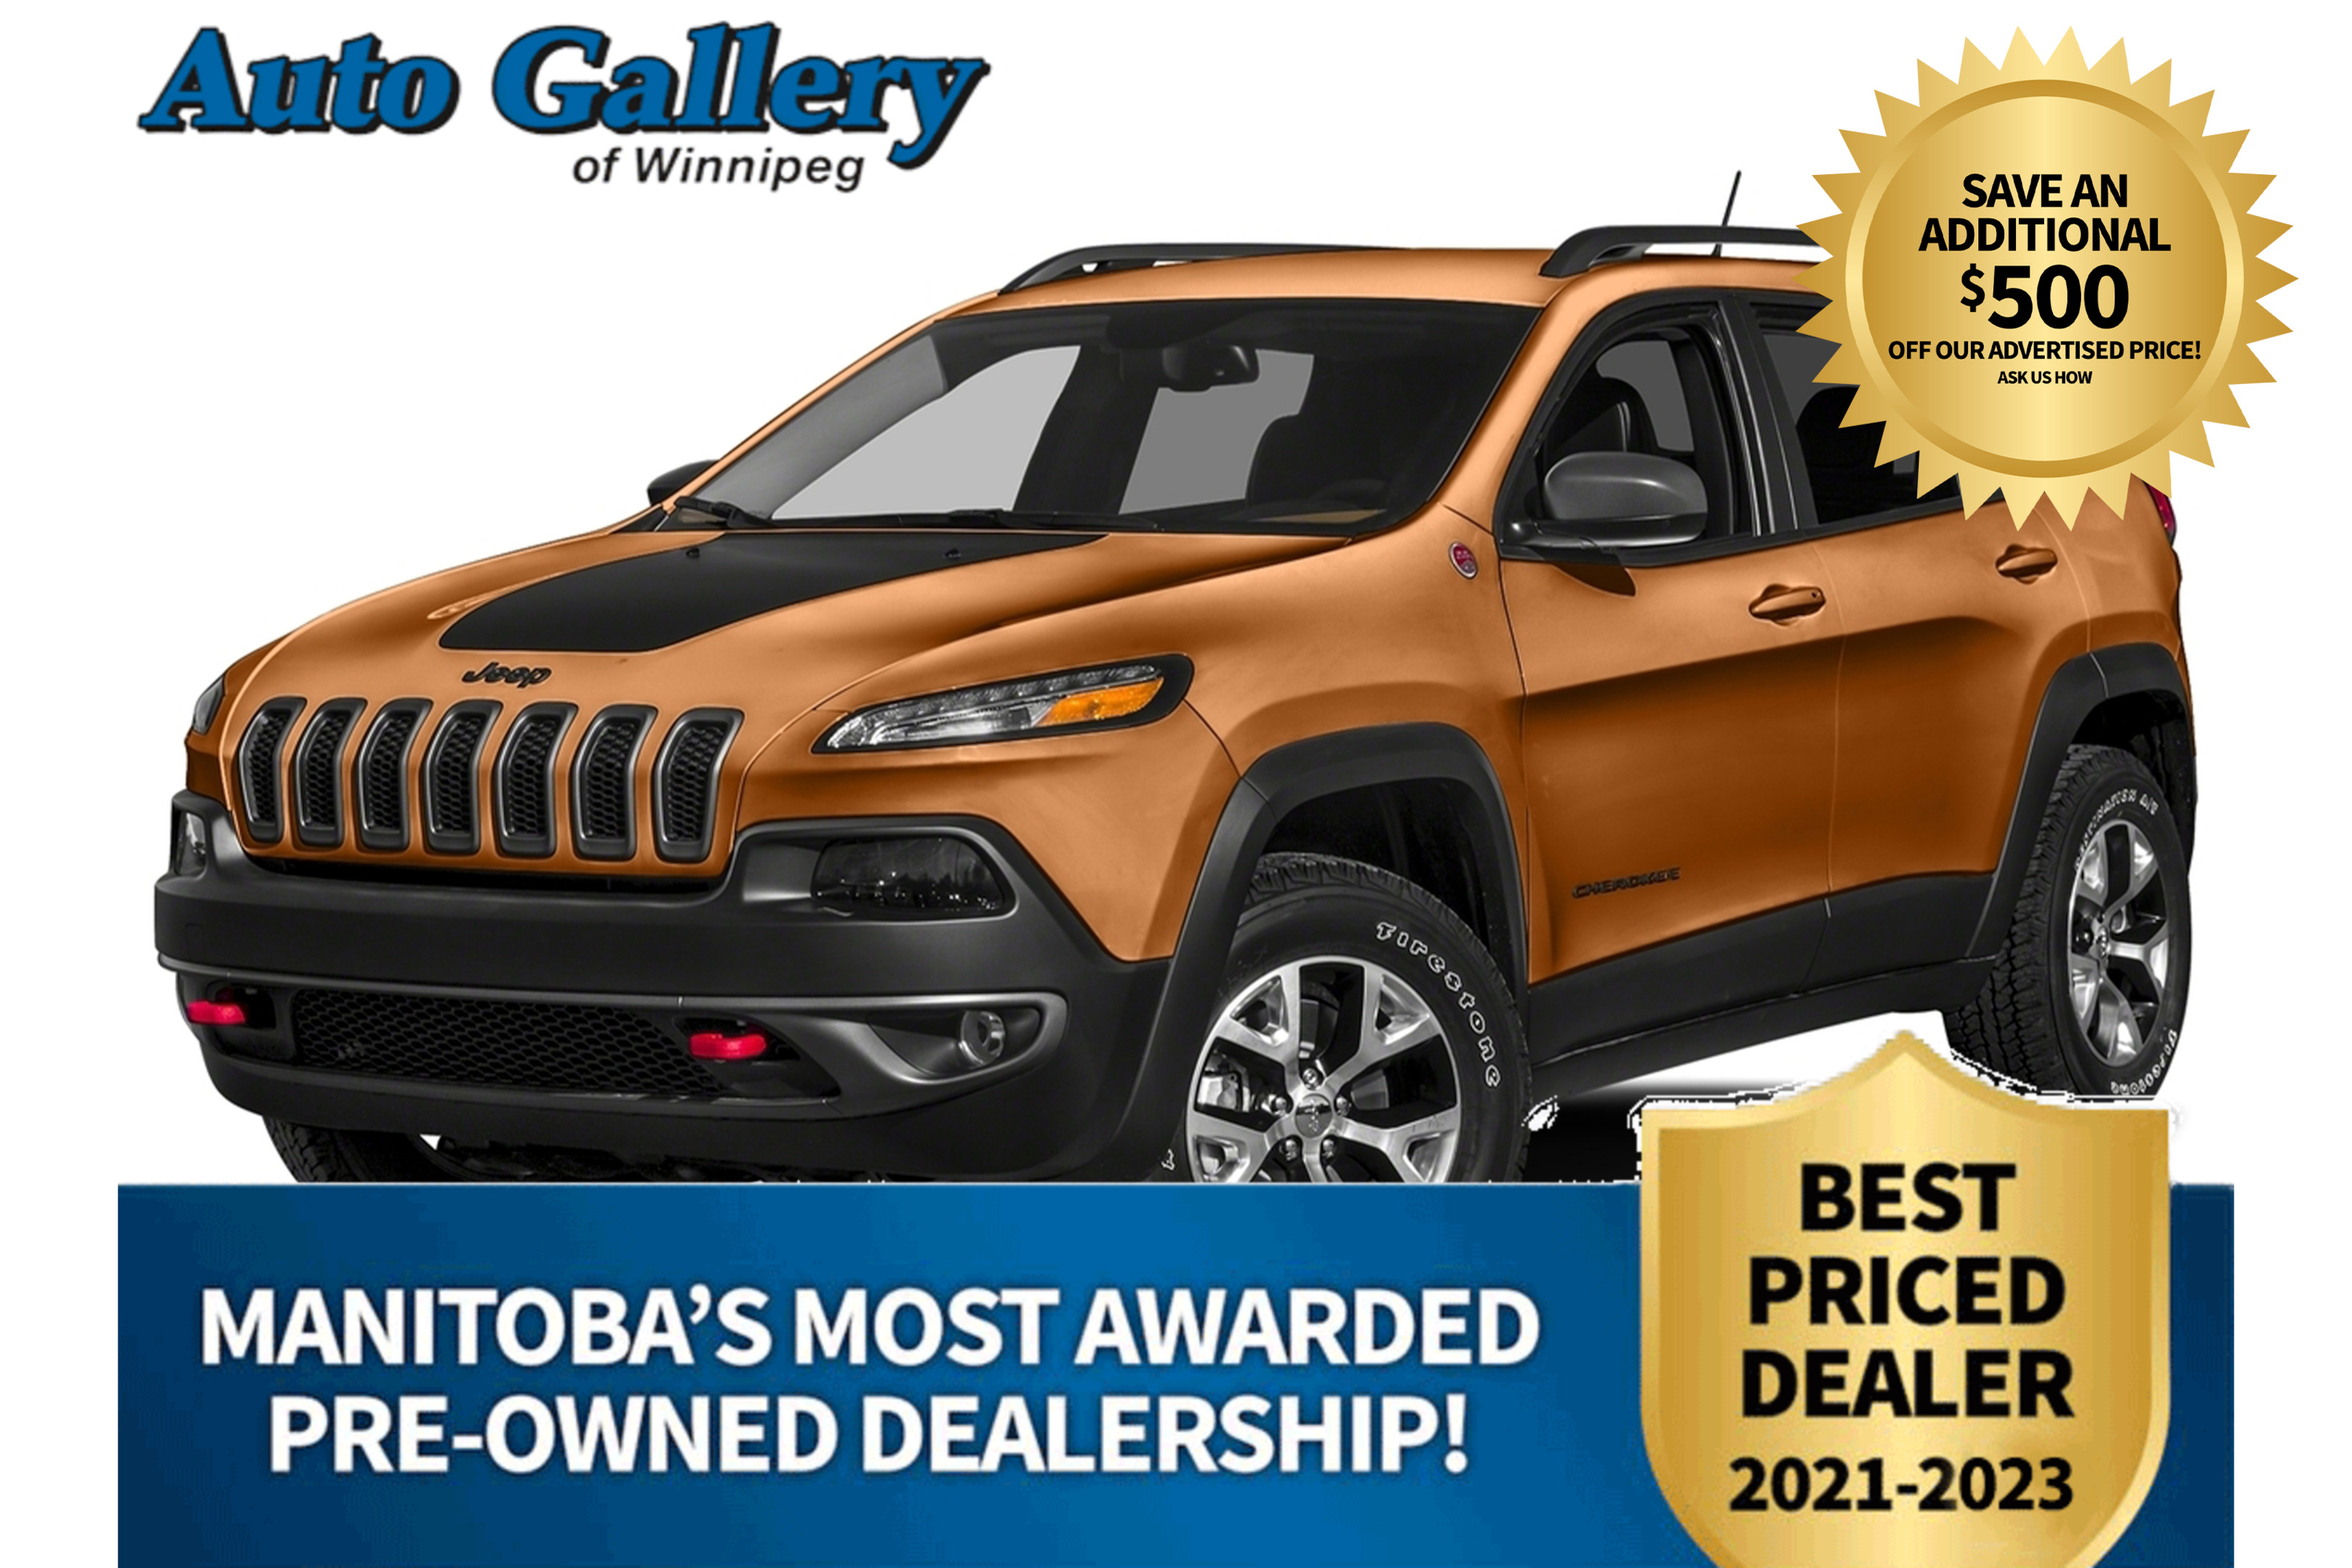 2016 Jeep Cherokee Trailhawk, 4WD, PANORAMIC ROOF, HTD/CLD SEATS, SXM